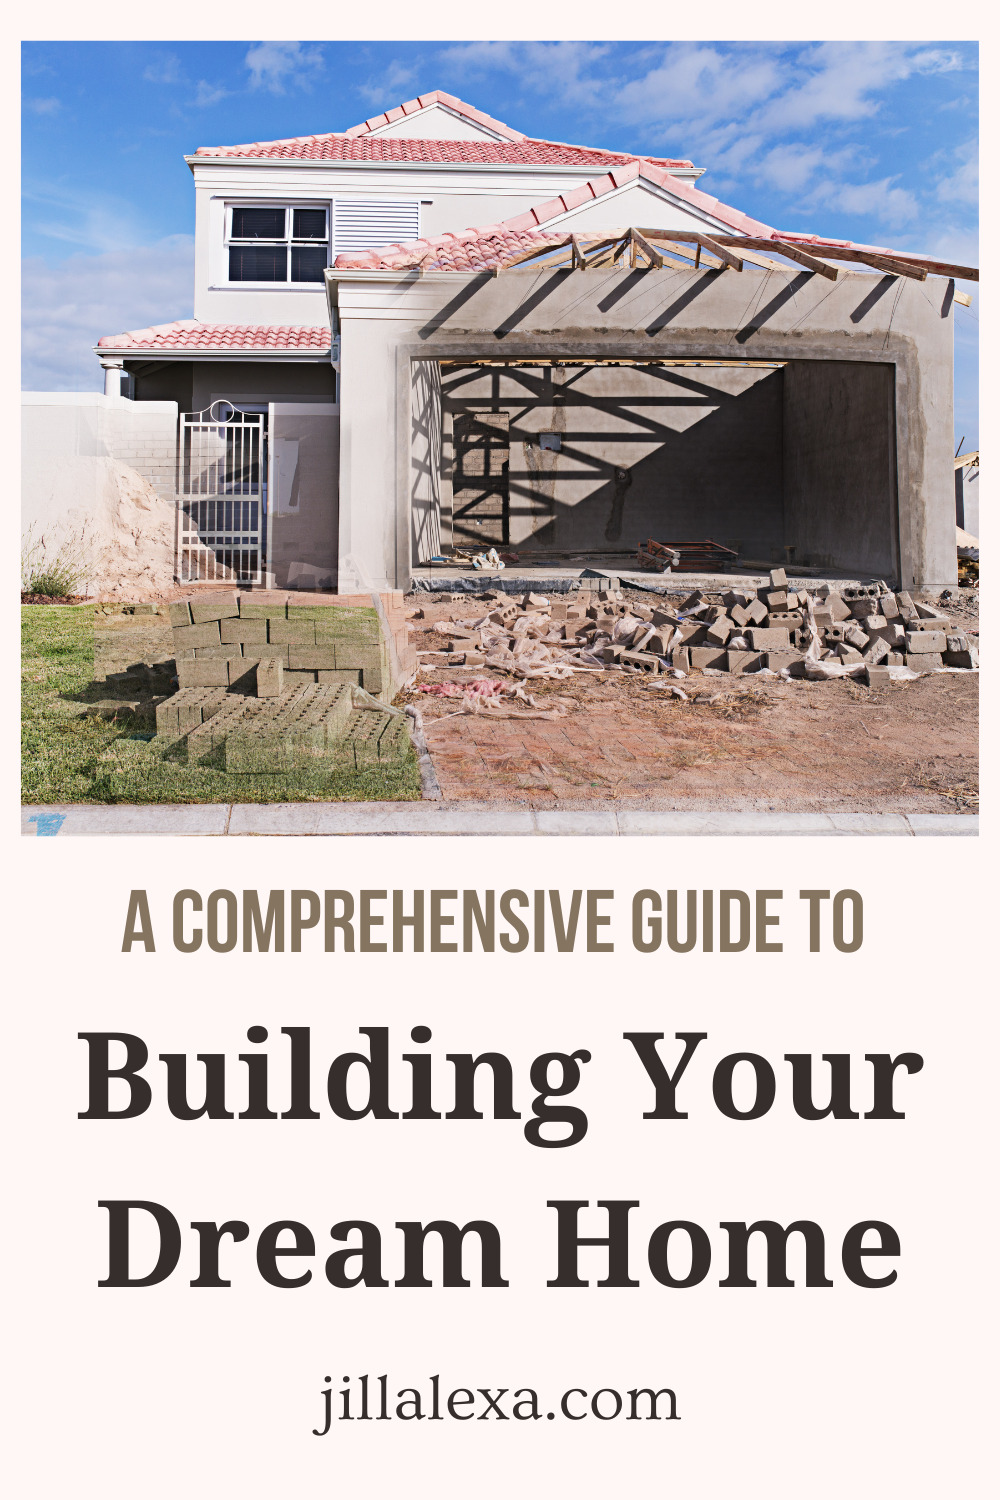 If building your dream home is at the top of your bucket list, you are going to love these 7 useful guidelines to create your very own paradise from scratch.